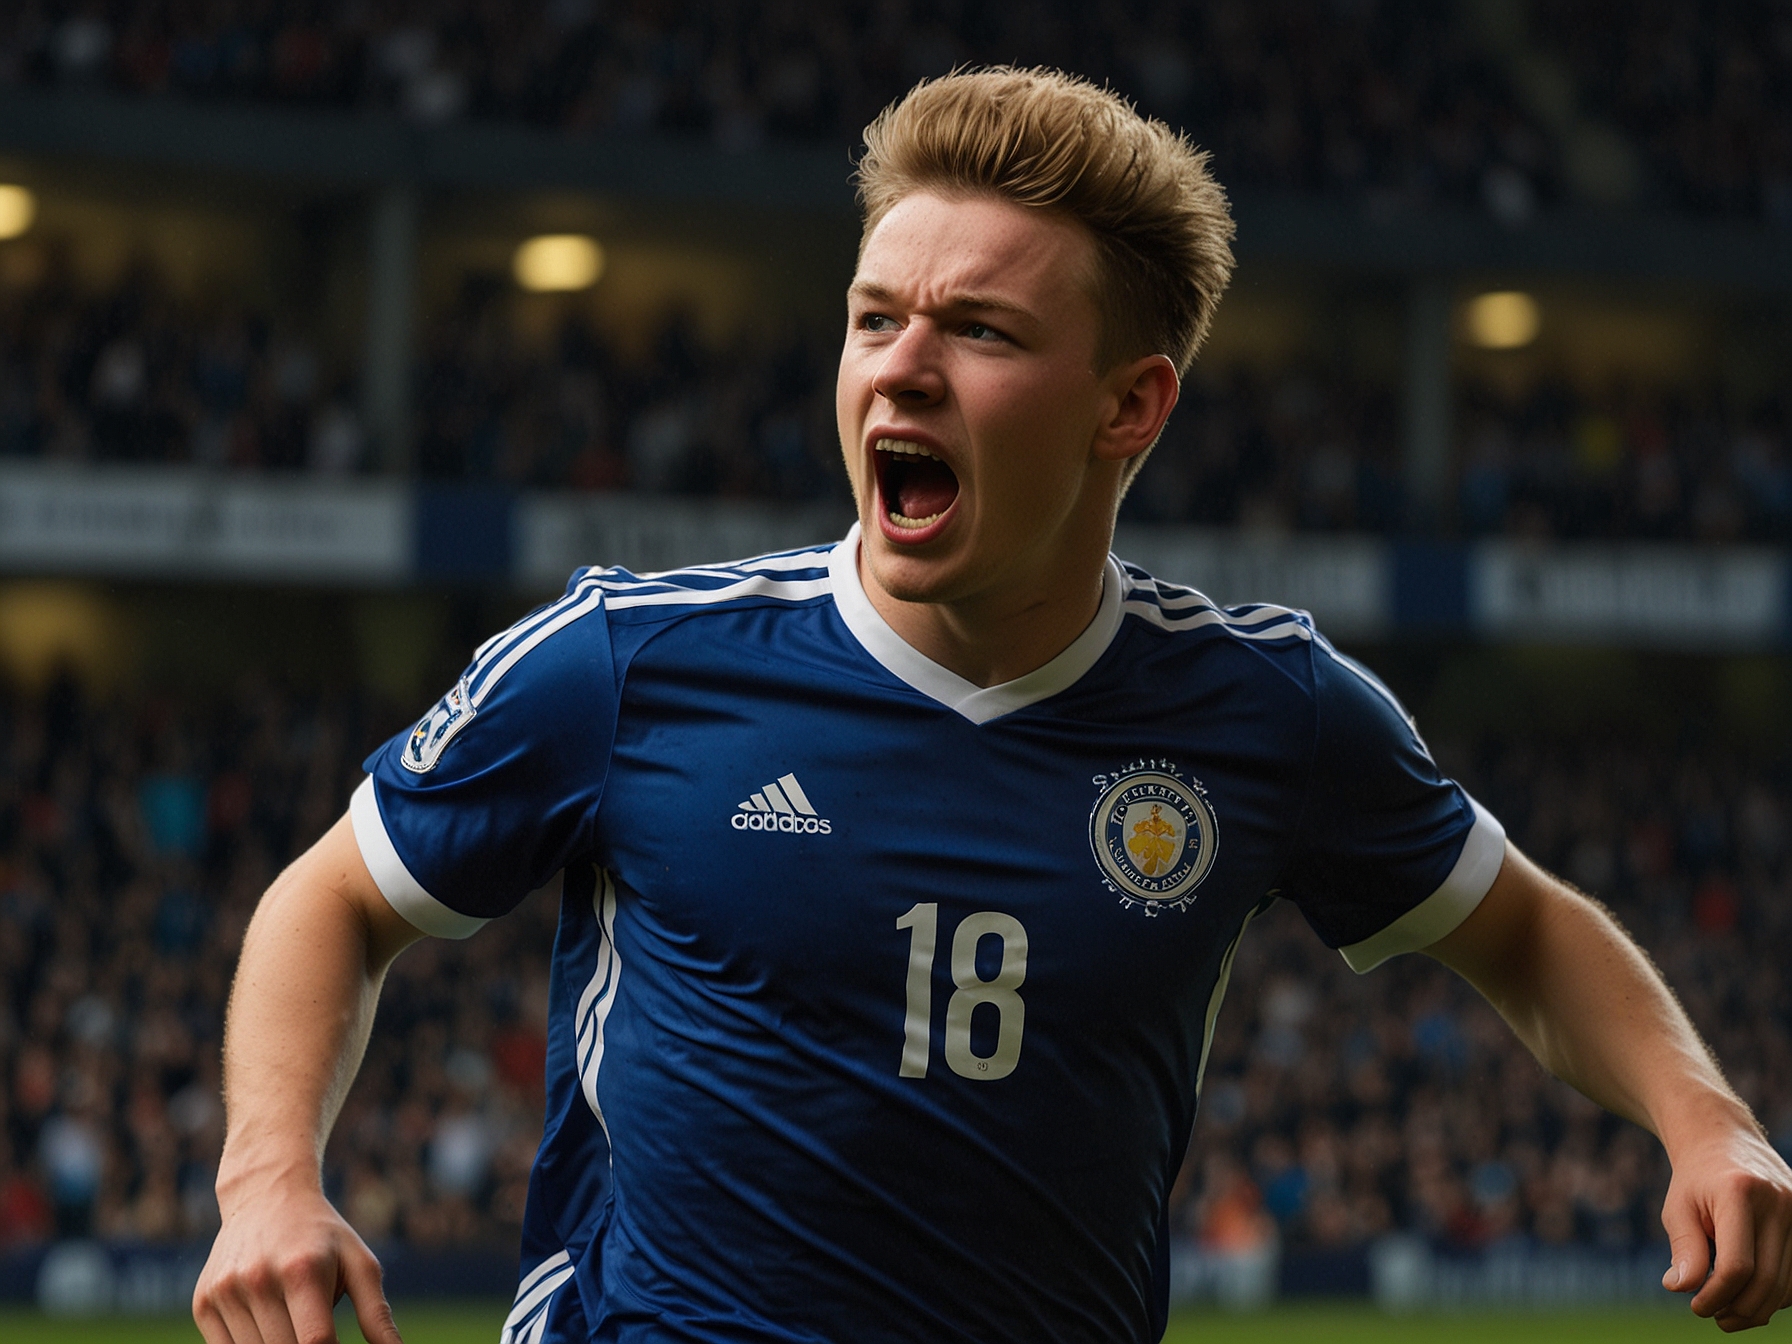 An image depicting an enthusiastic young Scotland U21 star, highlighting their notable performances and the potential £30 million transfer that could boost their career.